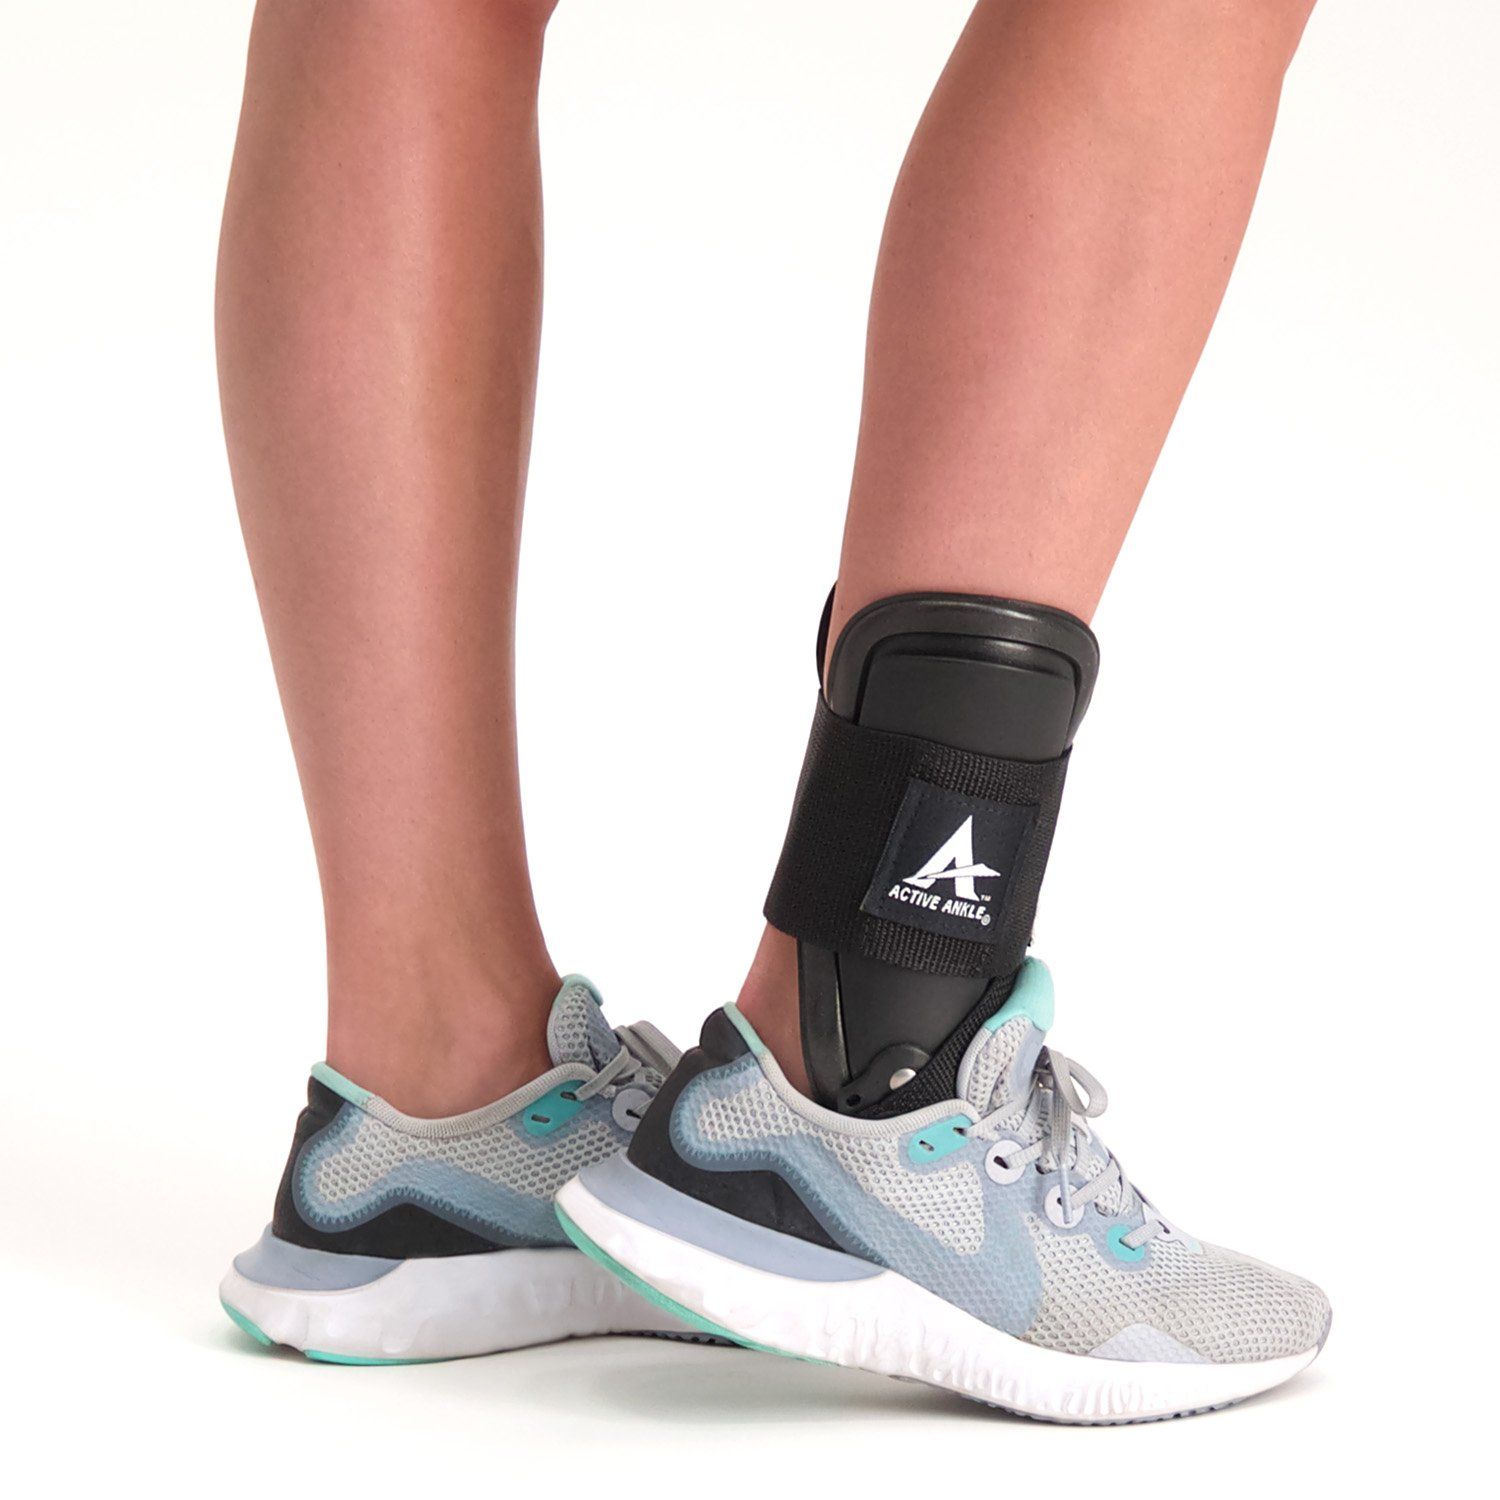 Active Ankle T2 Sports Ankle Support side view